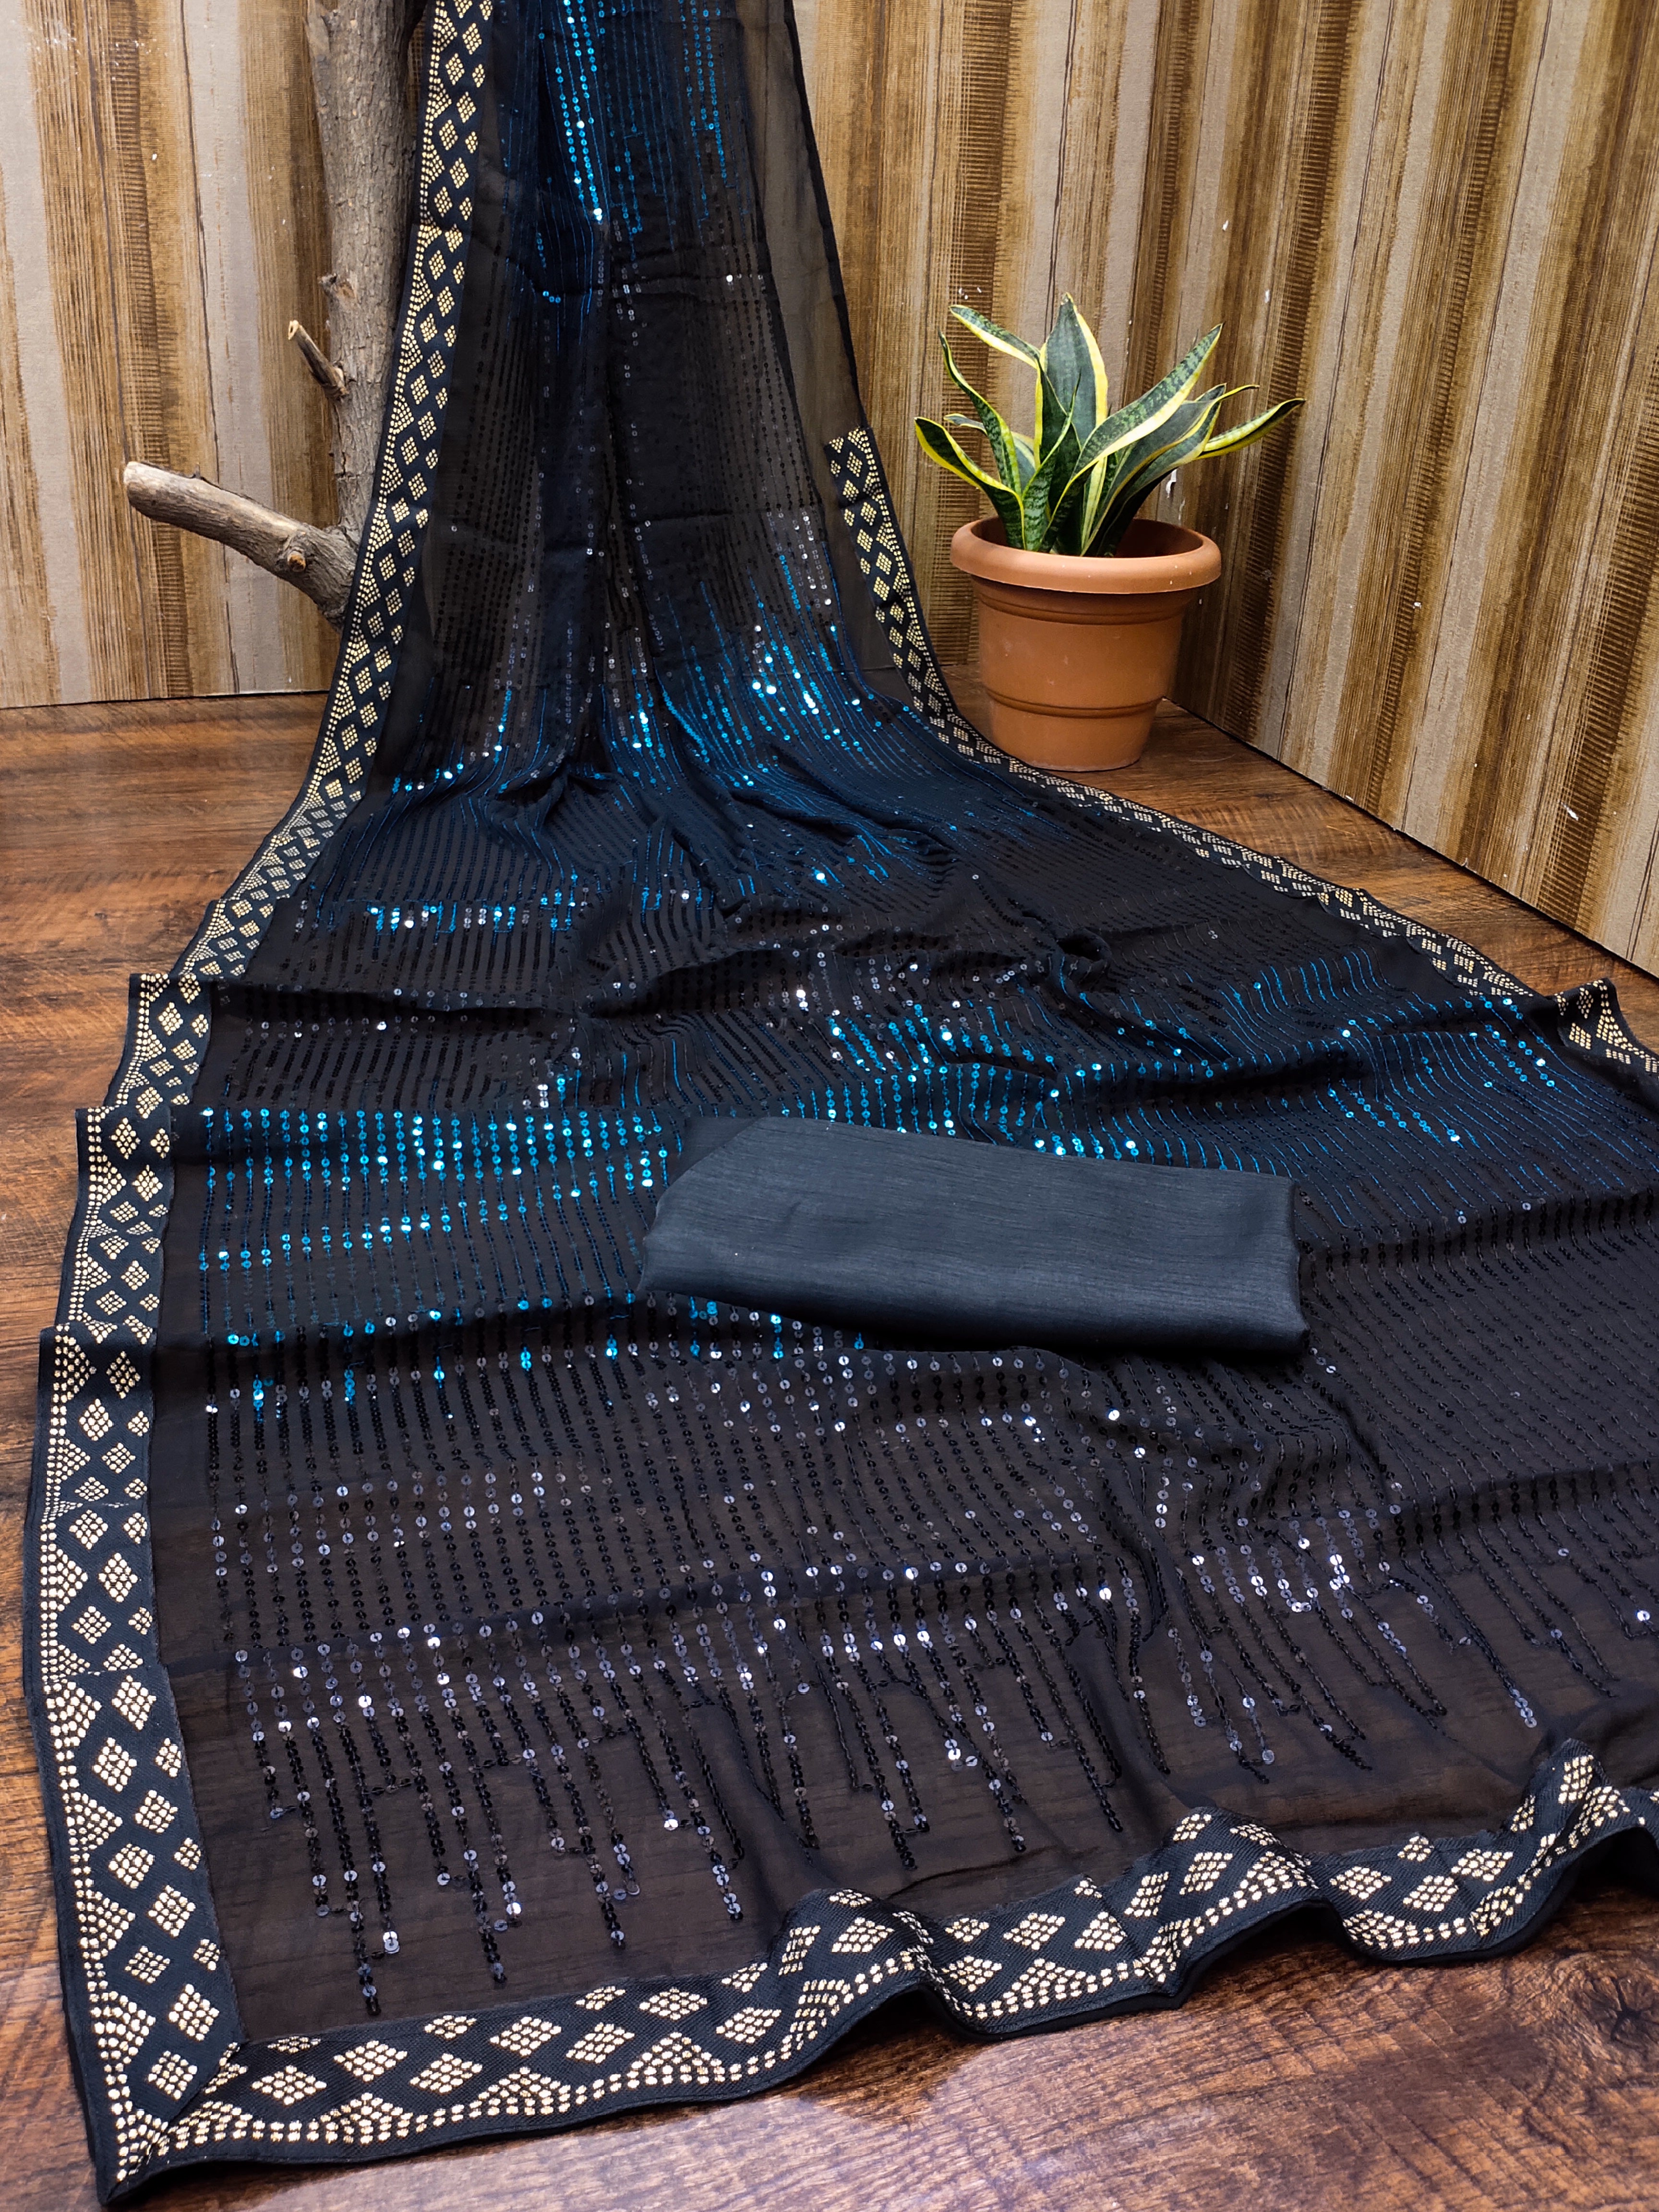 Beautiful Sequance Embroidery Work Black & Teal Blue Saree For Women